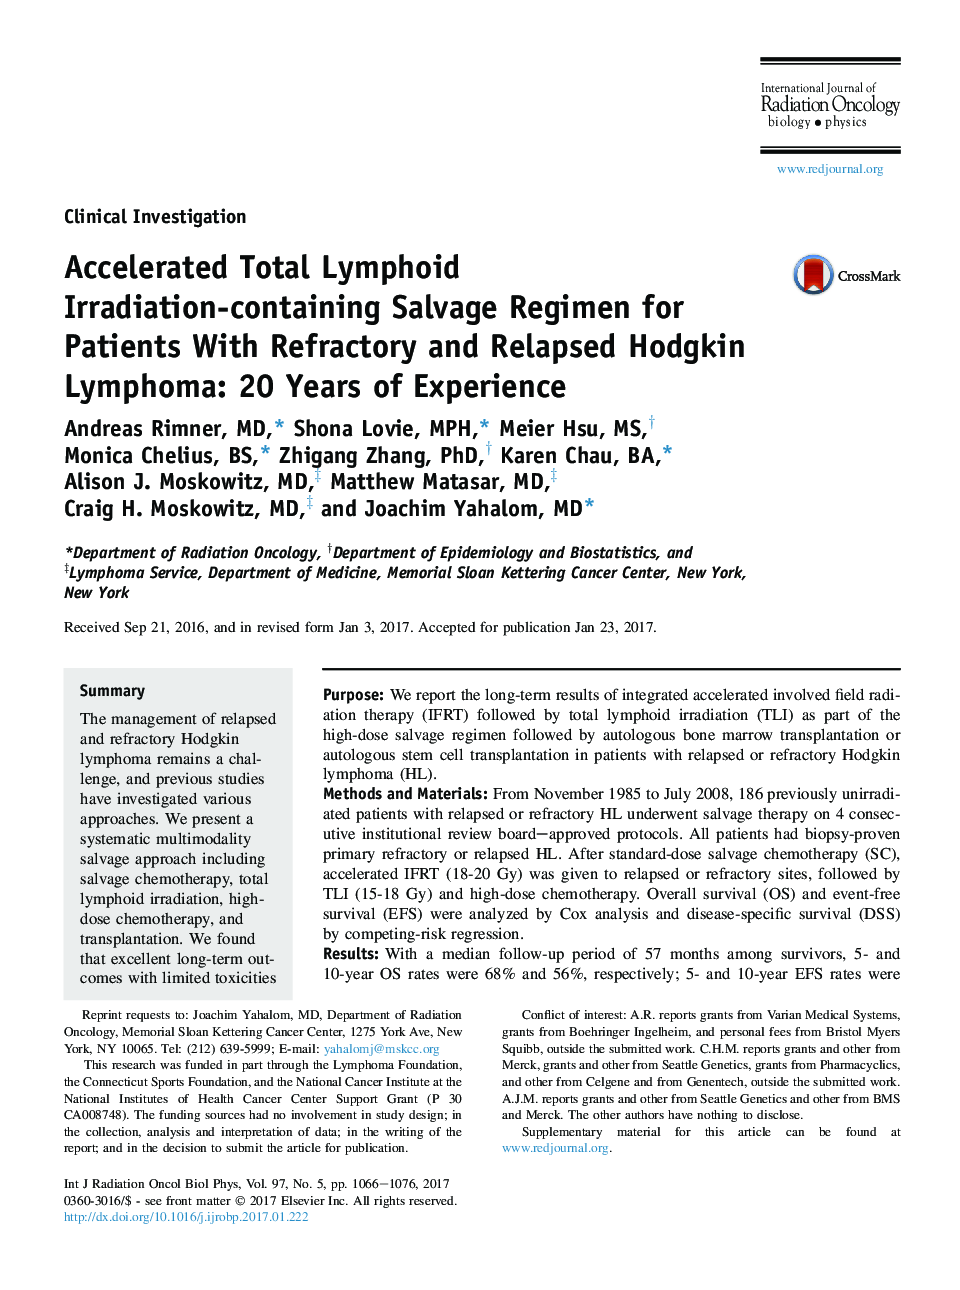 Accelerated Total Lymphoid Irradiation-containing Salvage Regimen for Patients With Refractory and Relapsed Hodgkin Lymphoma: 20Â Years of Experience